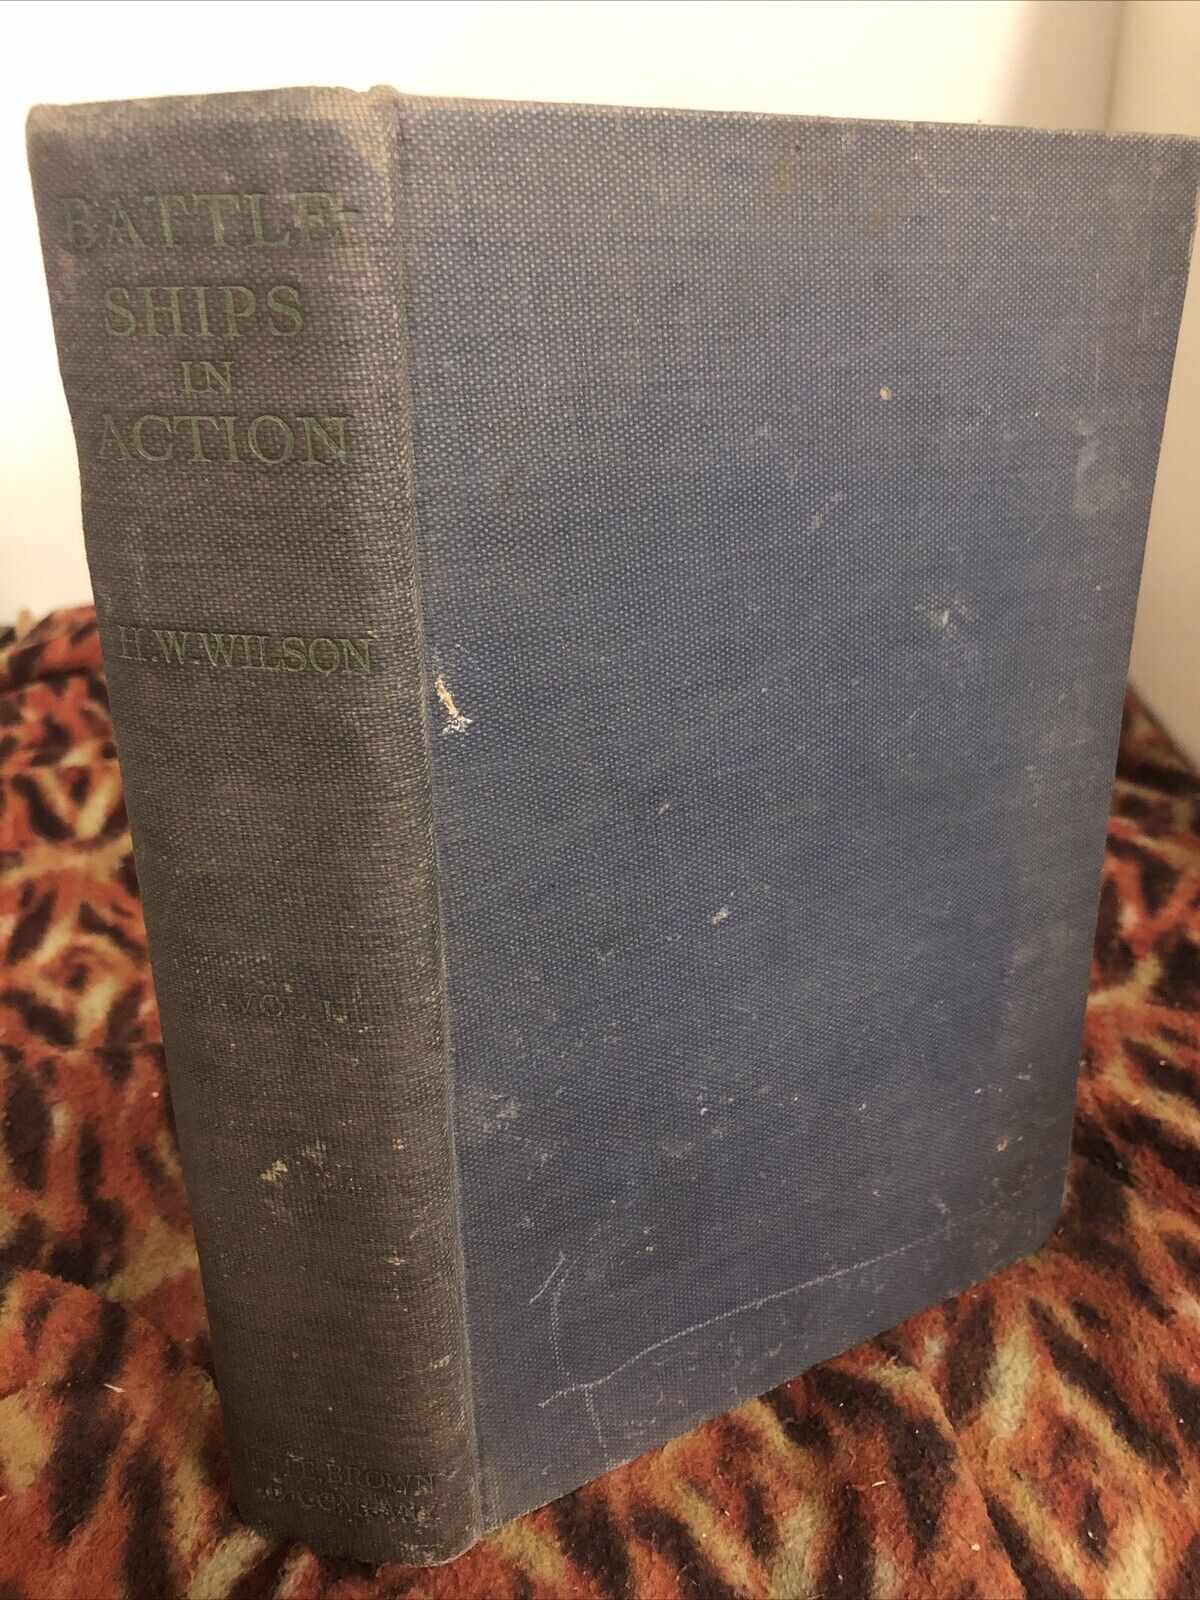 Battle Ships In Action Vol I From Armor To WWI HW Wilson Illustrated Ironclad